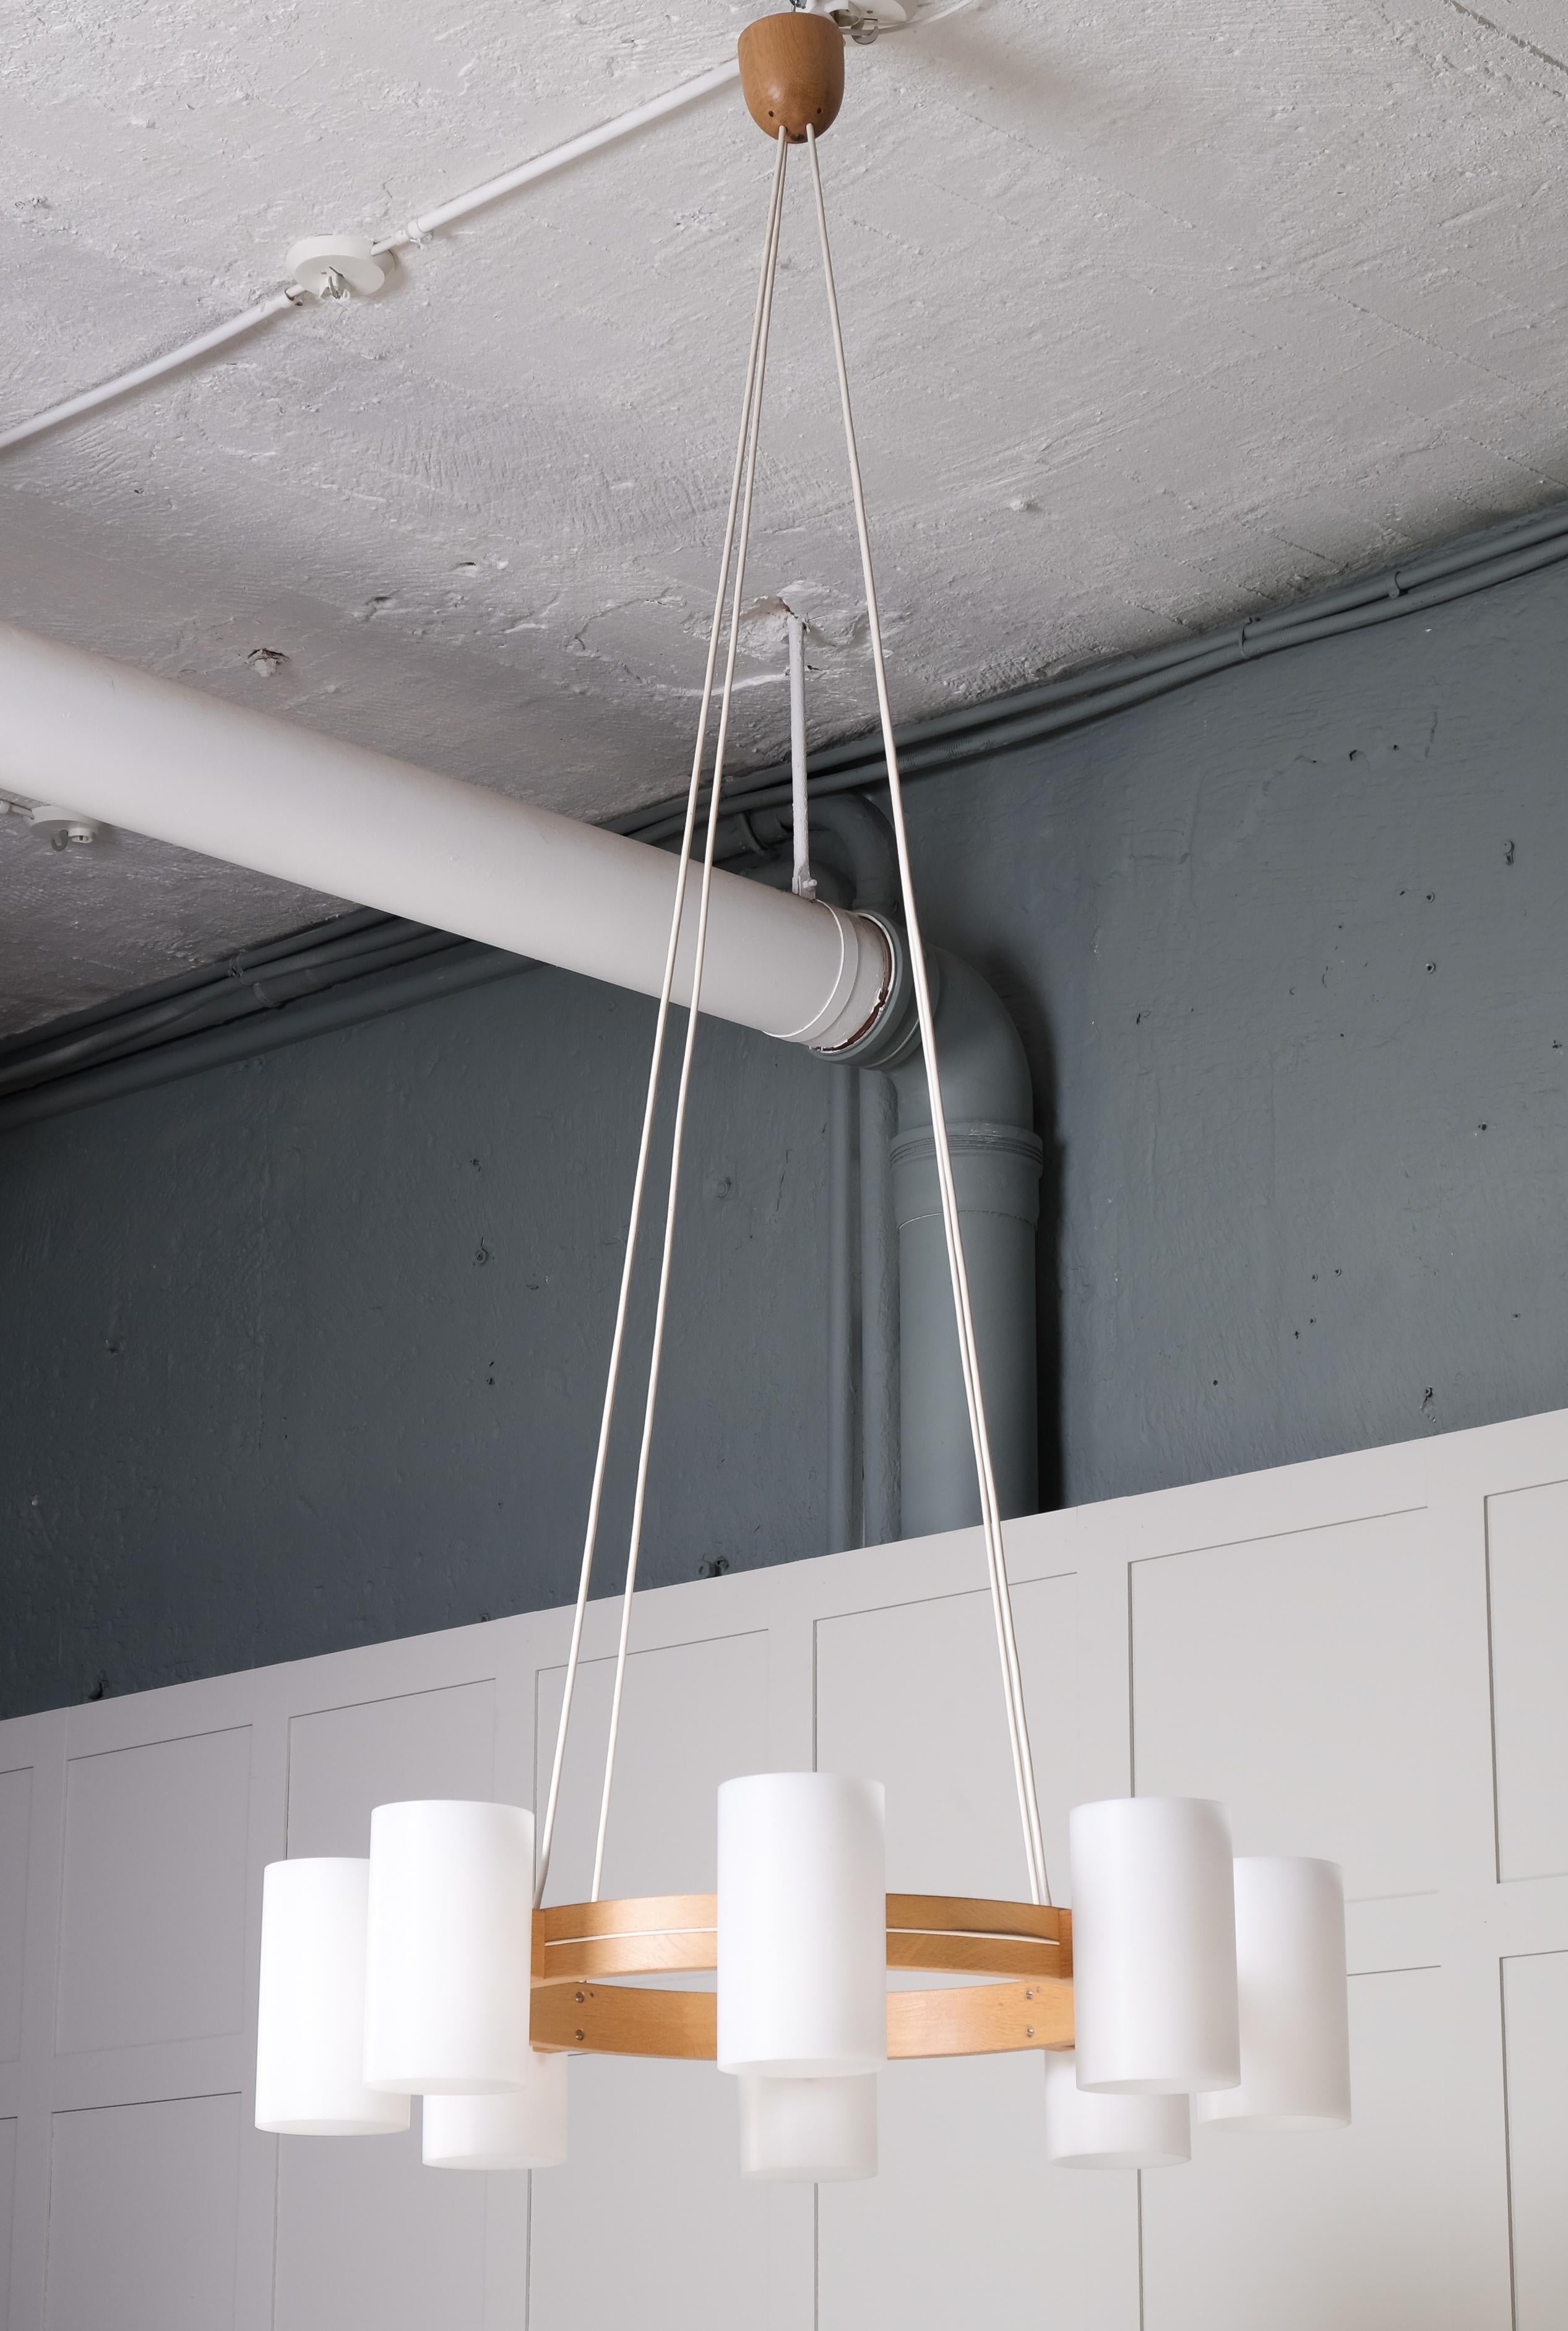 Set of 6 Chandeliers by Uno & Östen Kristiansson for Luxus, 1960s In Good Condition For Sale In Stockholm, SE